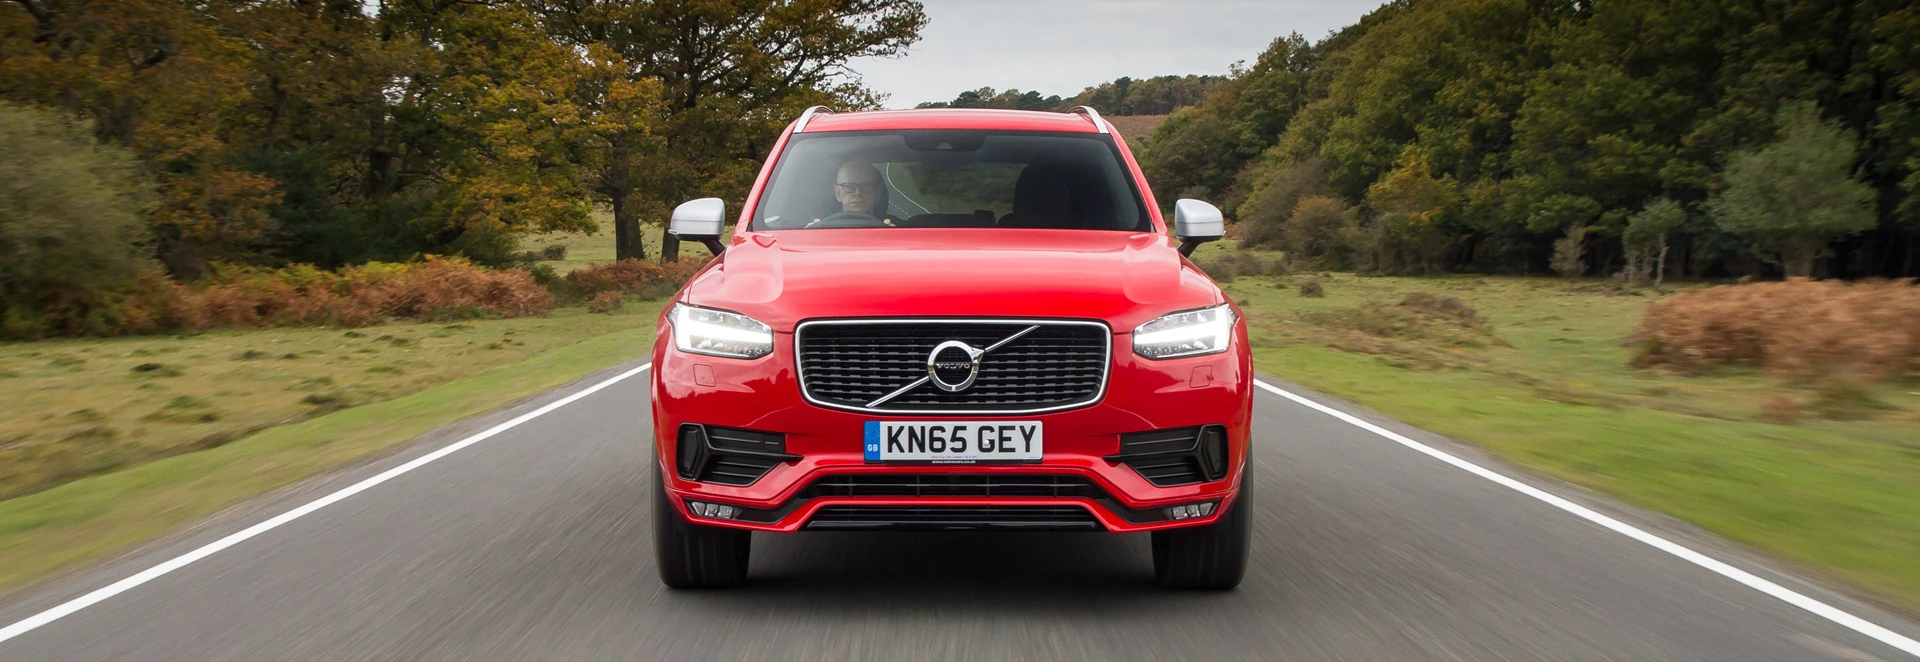 Volvo sales increase fast in 2016 